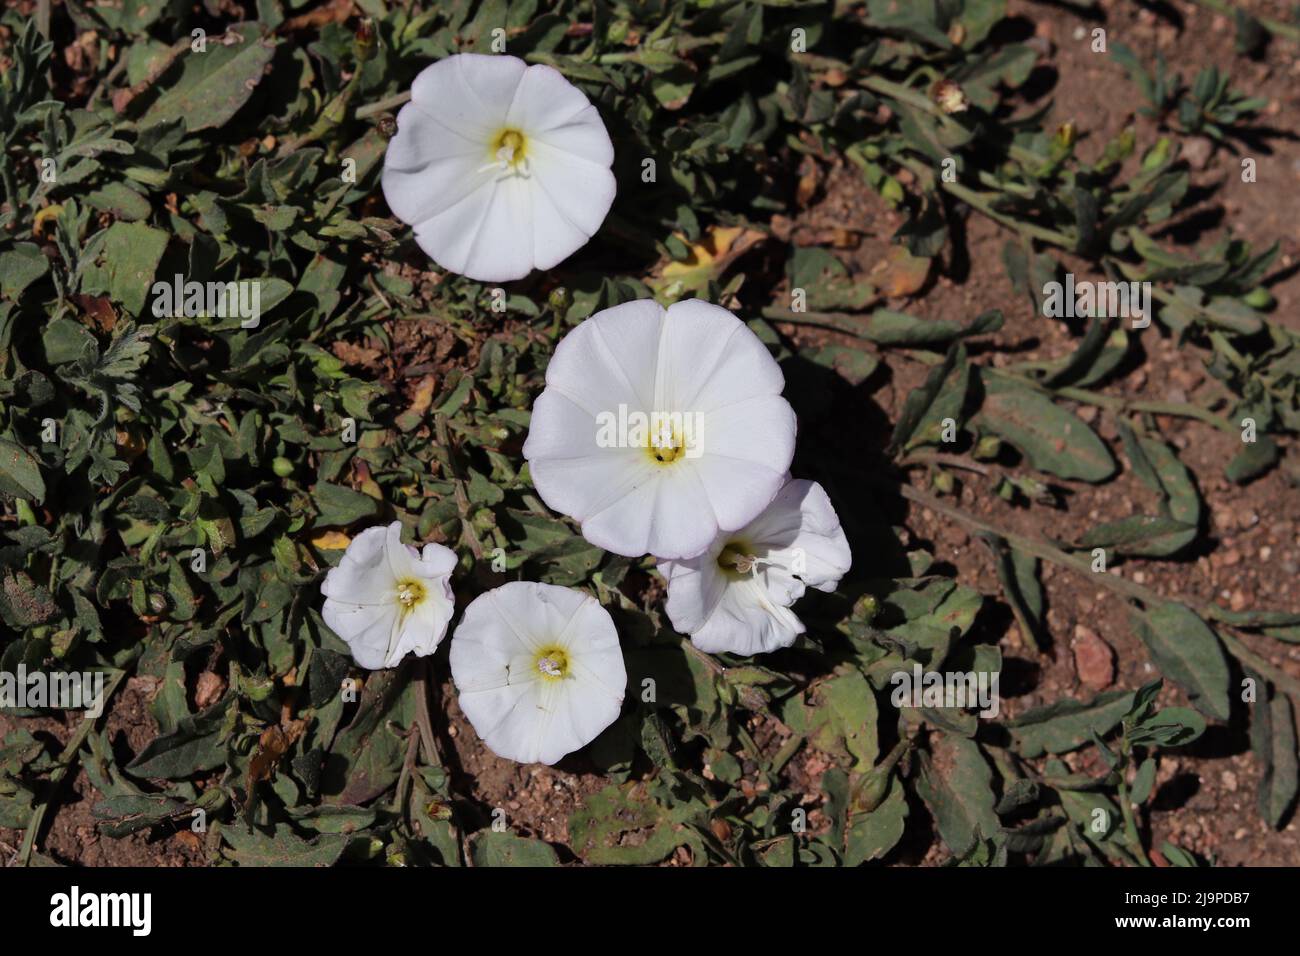 Cluster of white field bindweed or convolvulus arvensis flowers at Green Valley Park in Payson, Arizona. Stock Photo